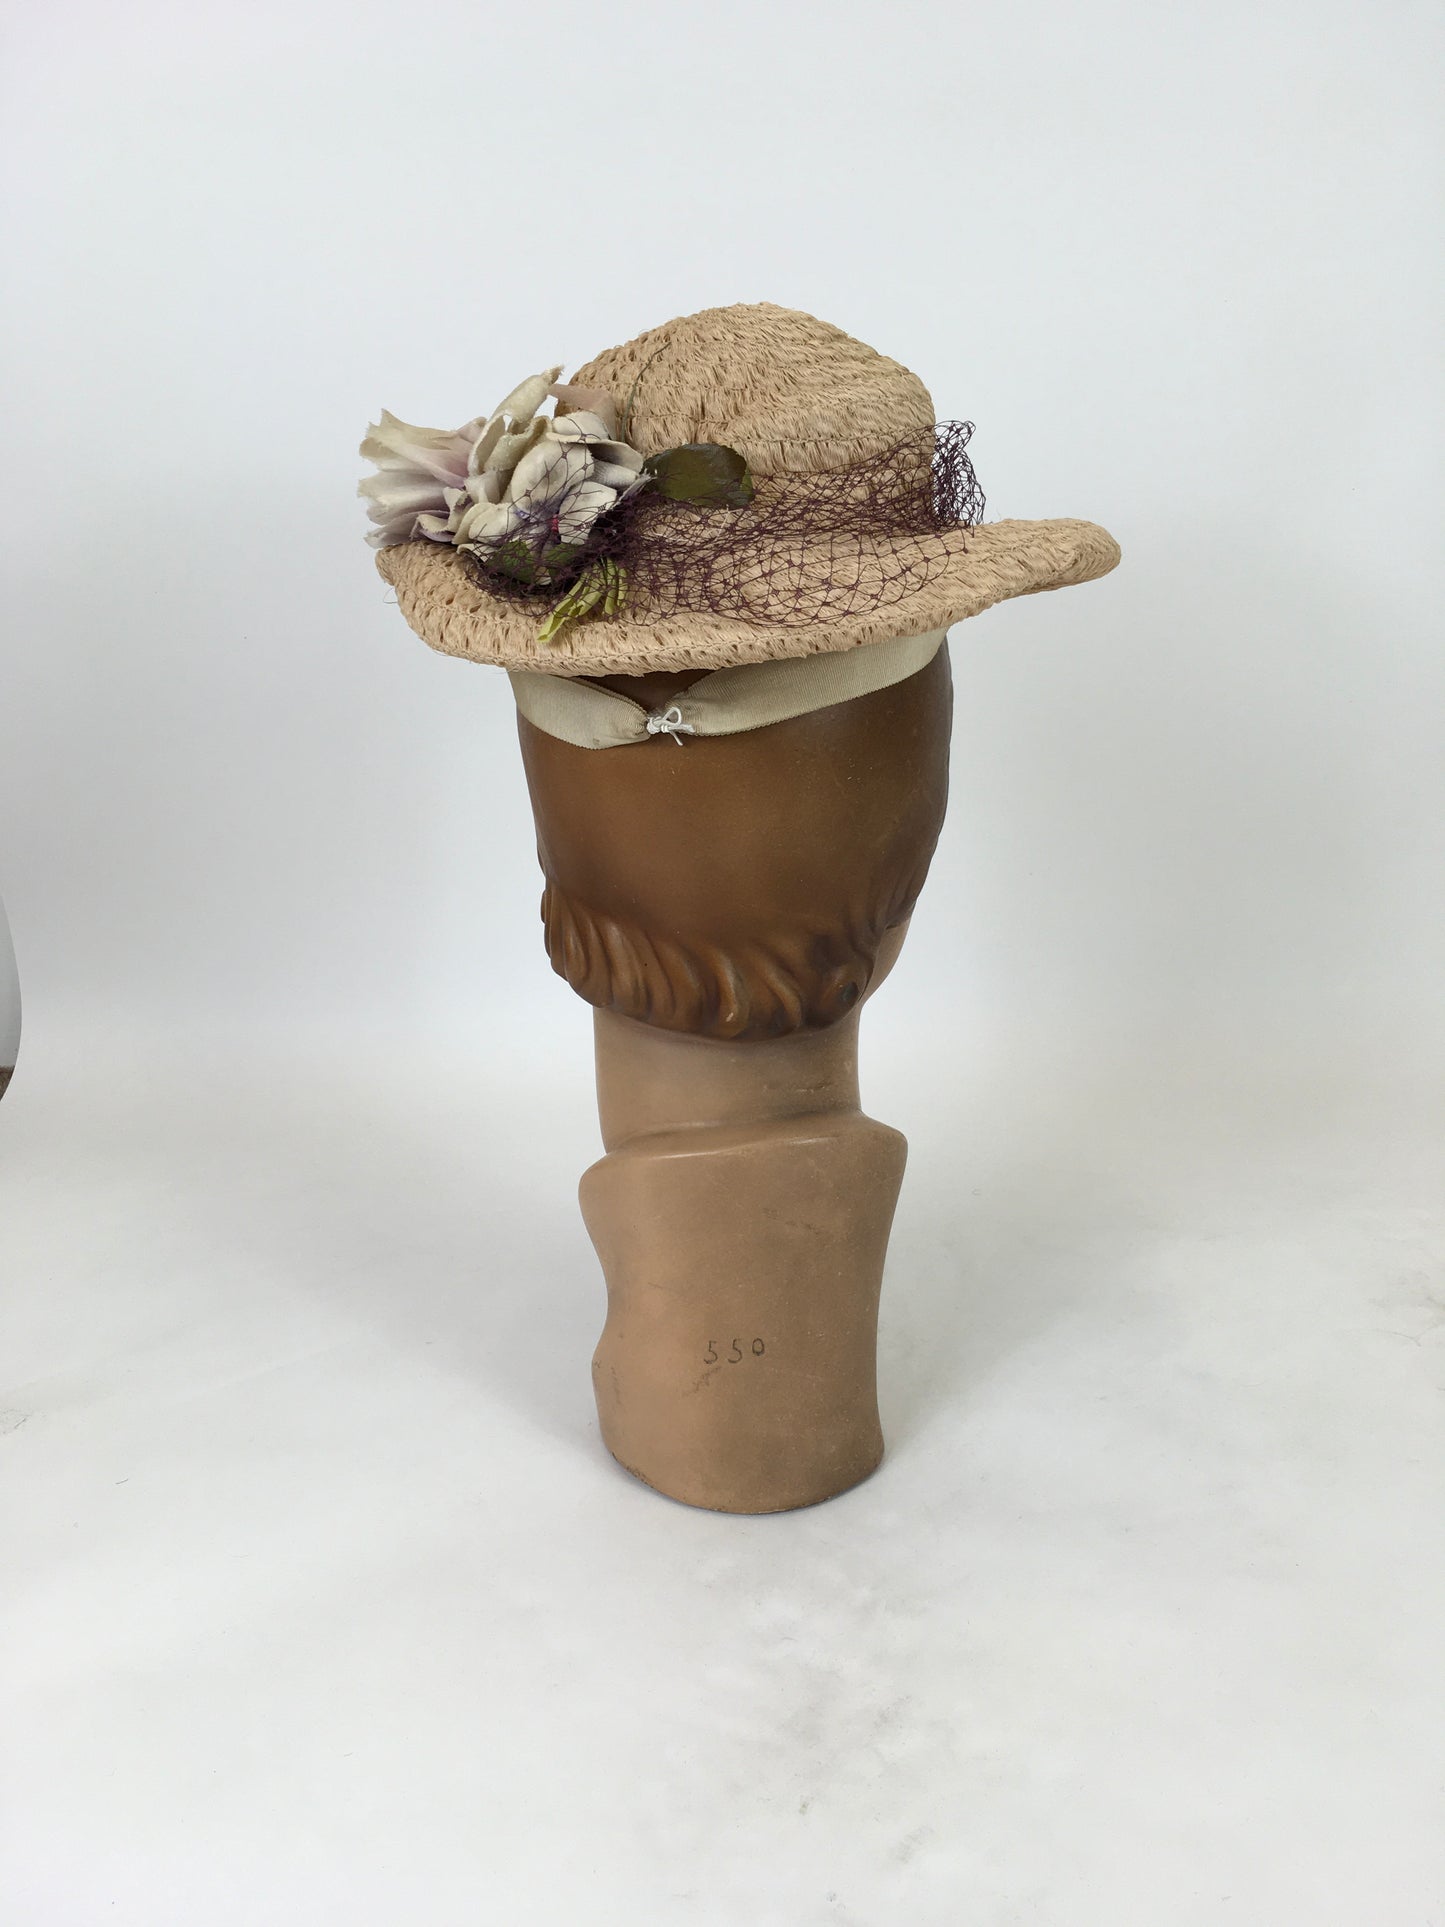 Original Late 1930's Darling Soft Raffia Hat - In A Pale Pink with Velvet Millinery and Deep Lavender Veiling